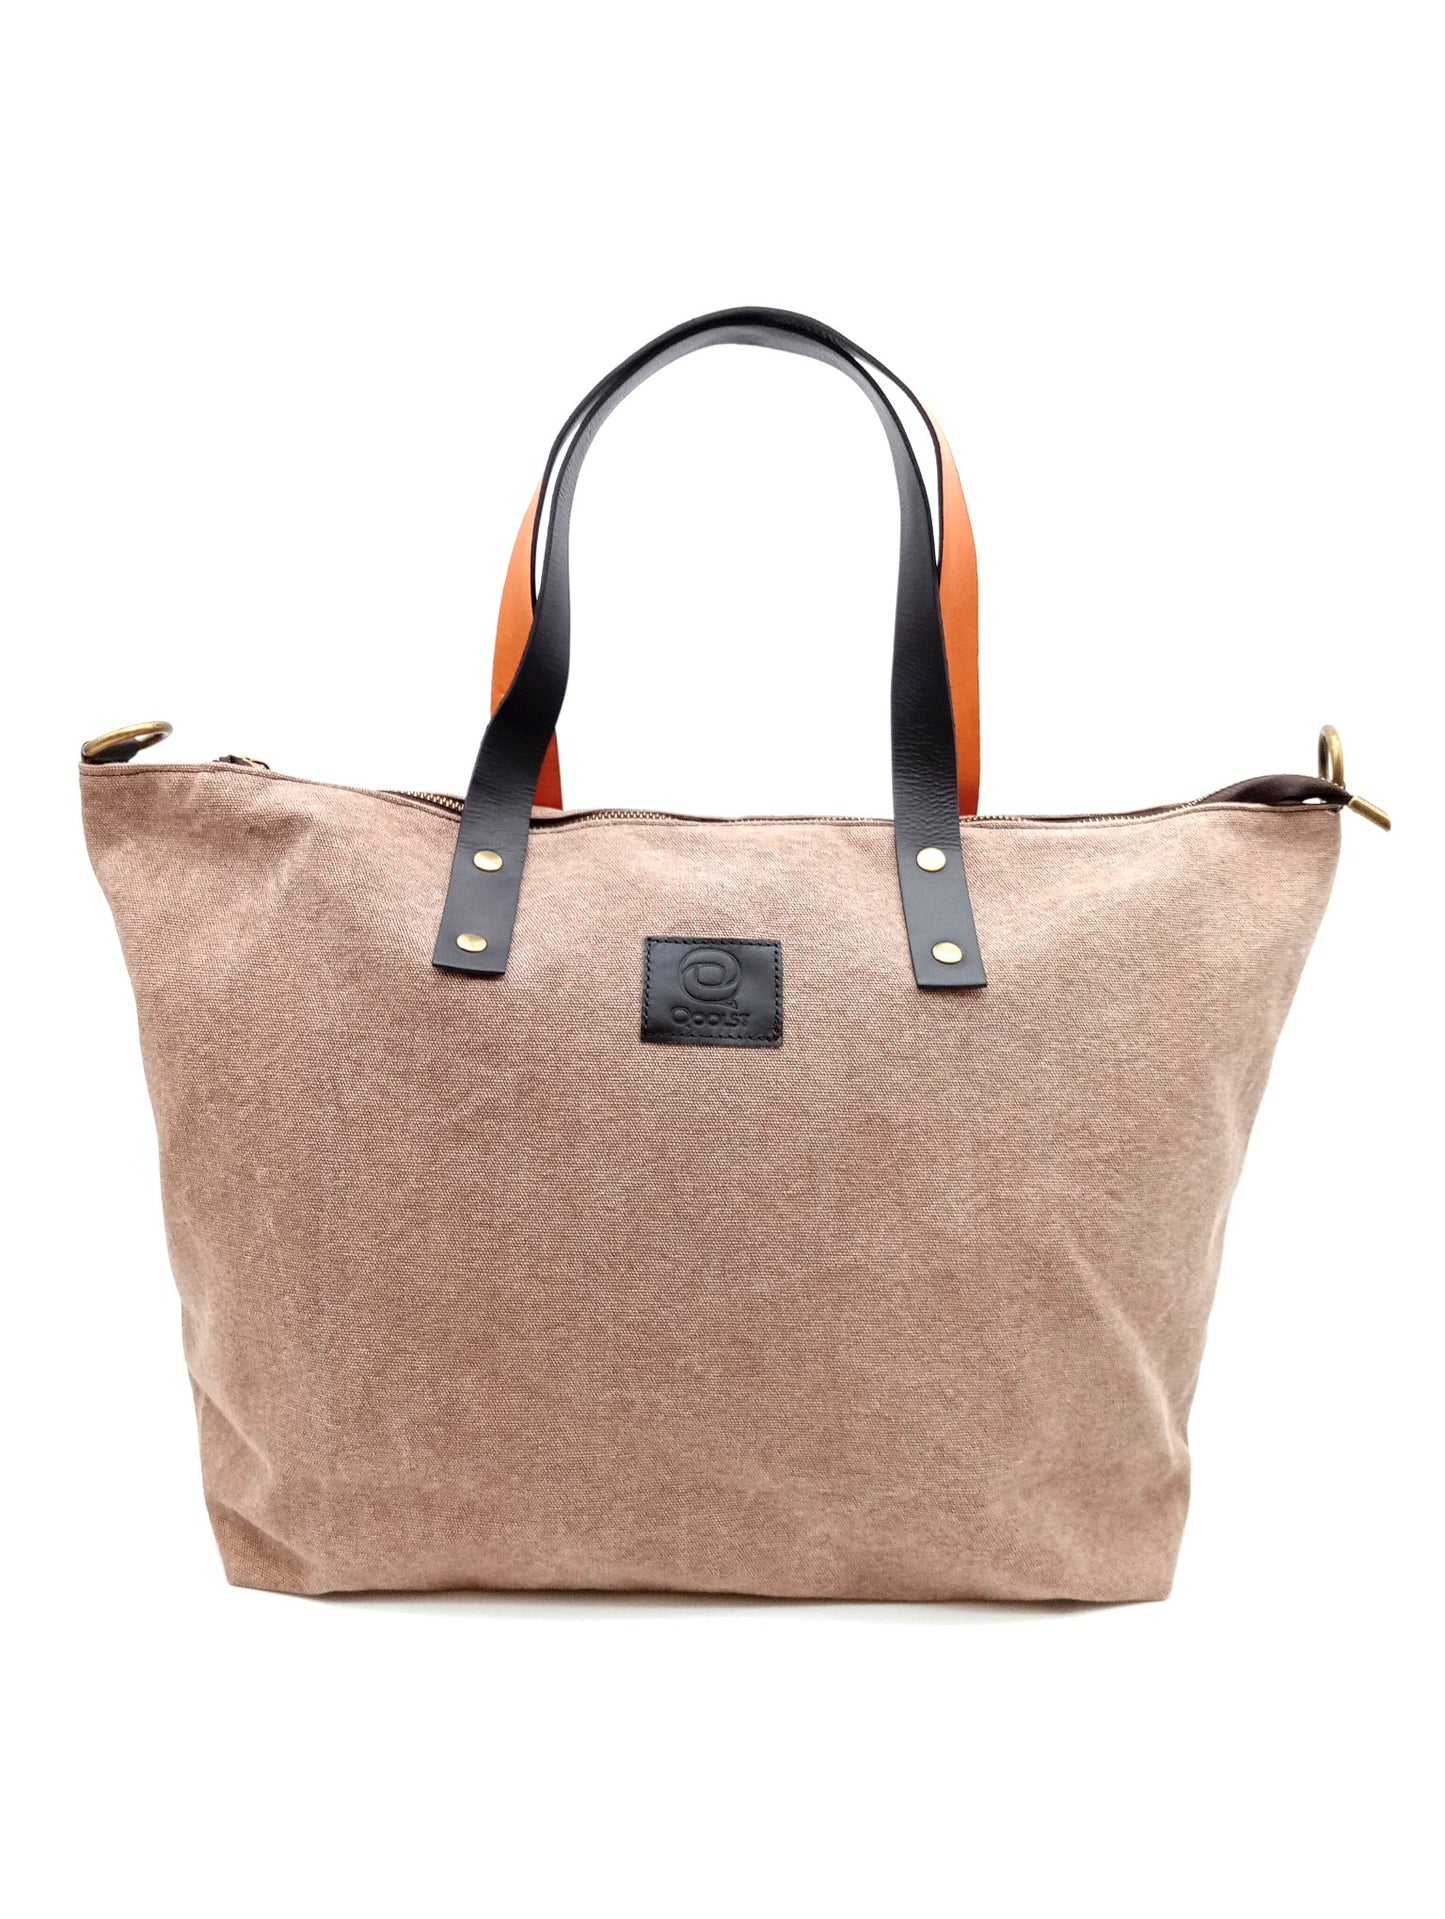 Bag for women and men hand and shoulder Shopper Trotter leather and cotton canvas Qoolst